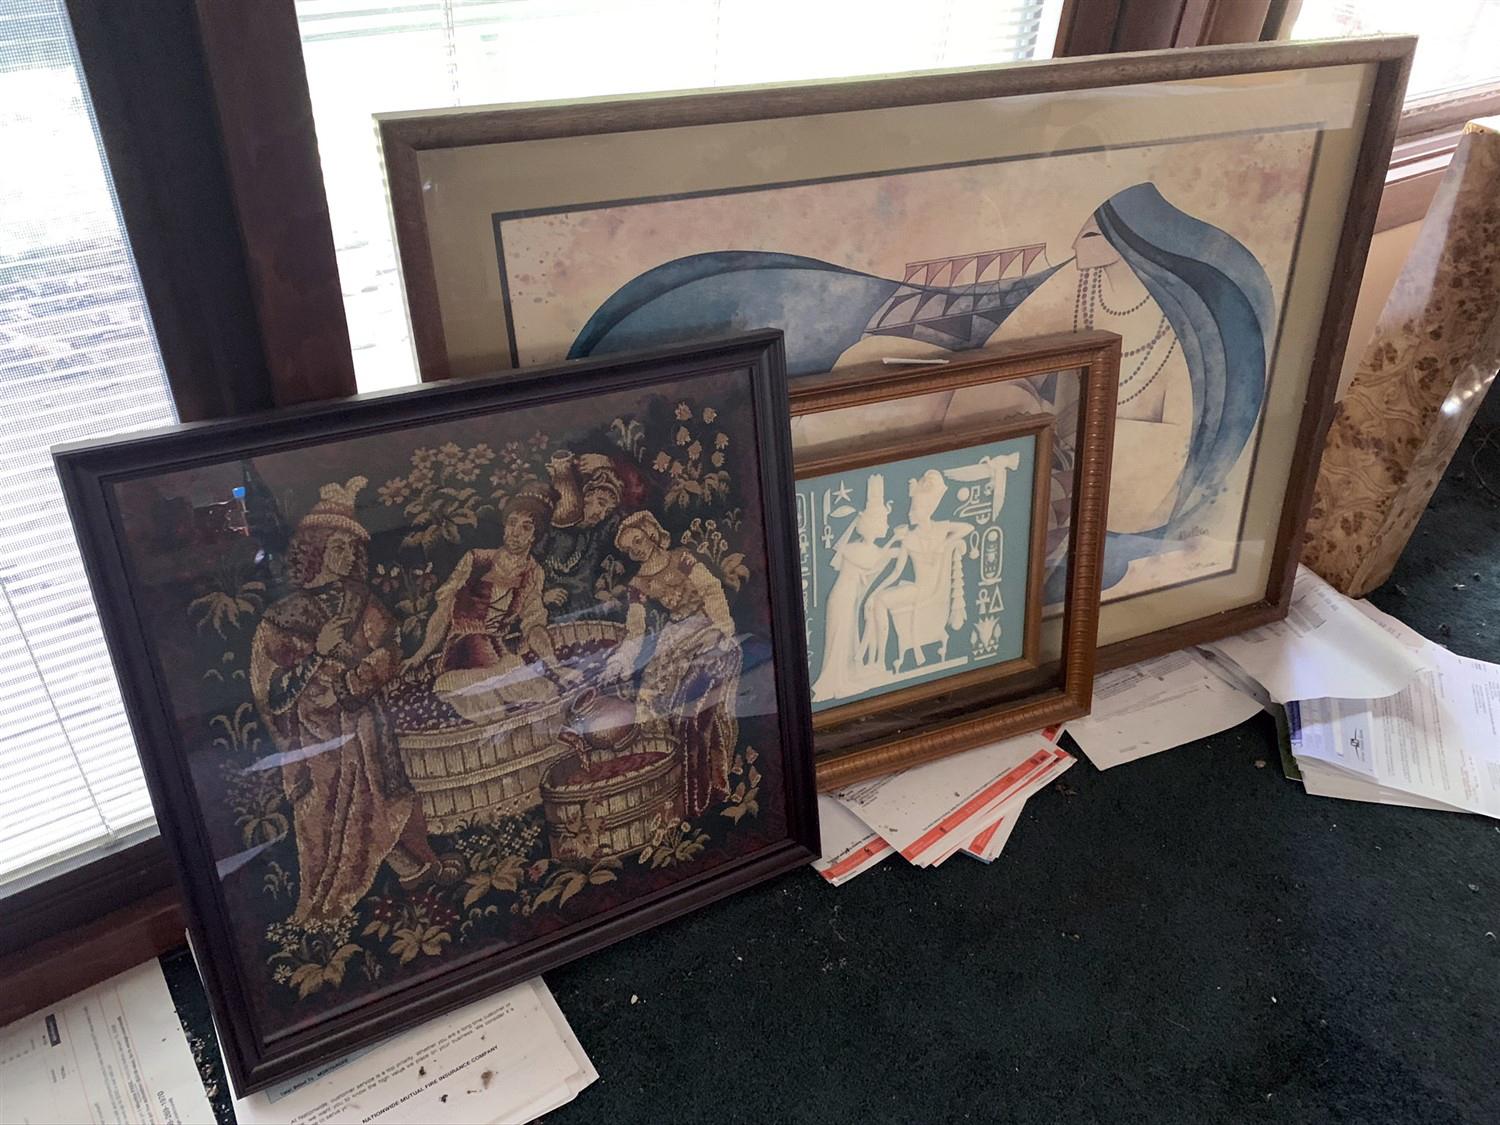 (3) Frames - Pharaoh and his Queen, Needle Point, and Pharaoh Prints